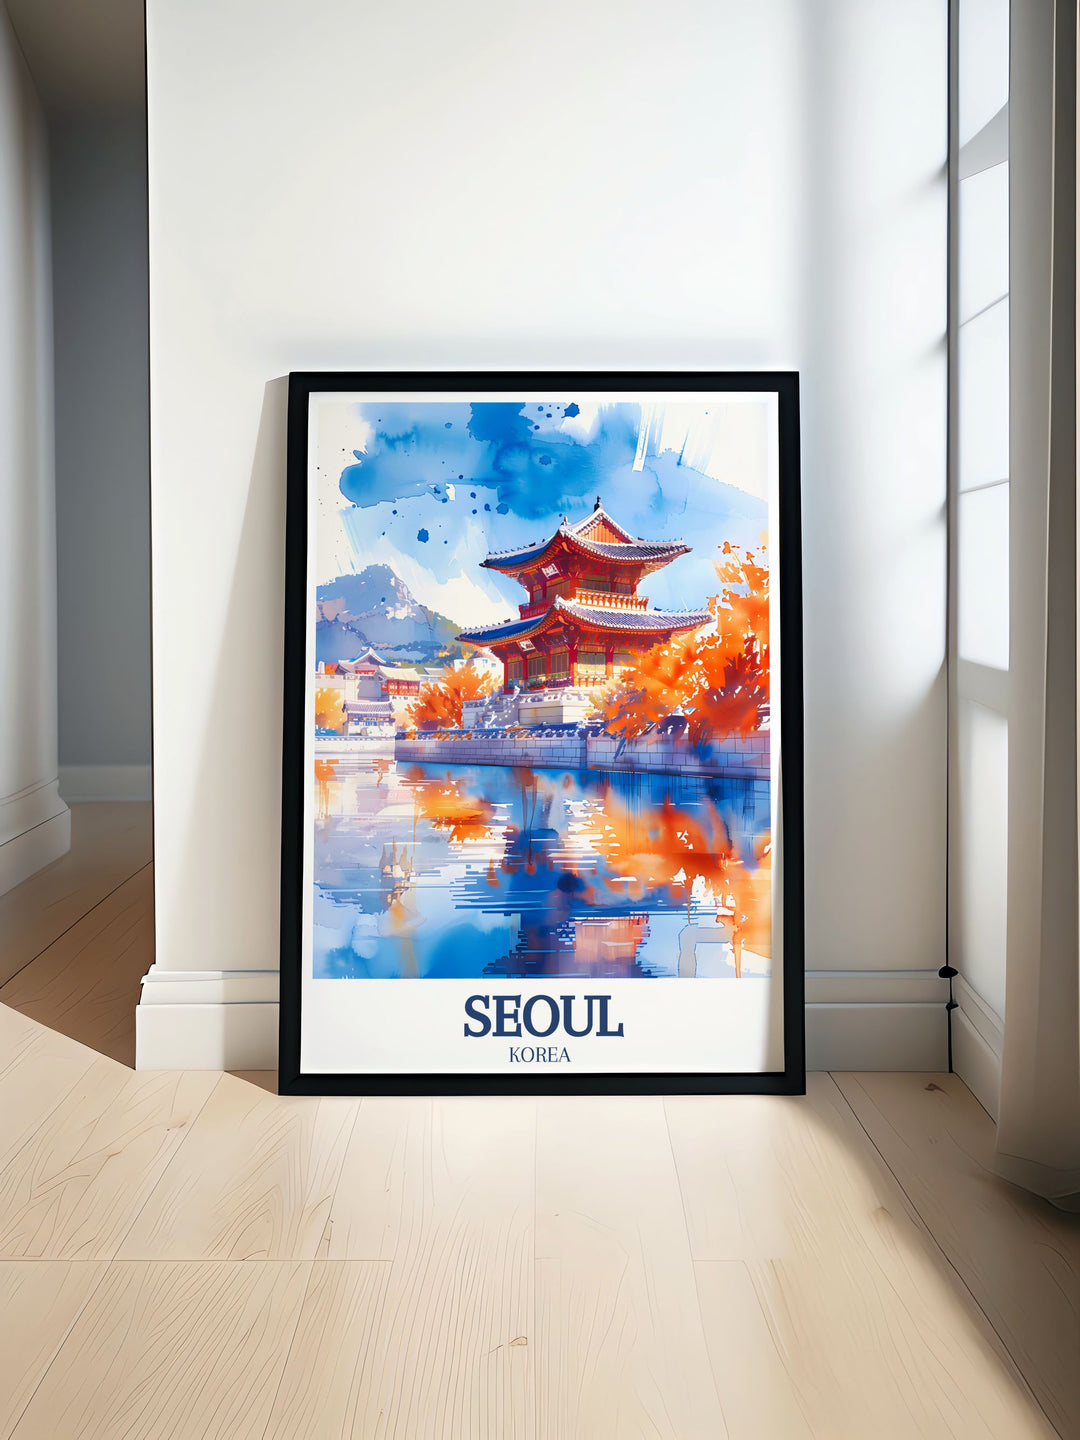 Beautiful Seoul Poster featuring Gyeongbokgung Palace and Han River perfect for home decor capturing the cultural richness and natural beauty of South Korea an ideal gift for travelers or anyone who appreciates fine art and elegant wall decor